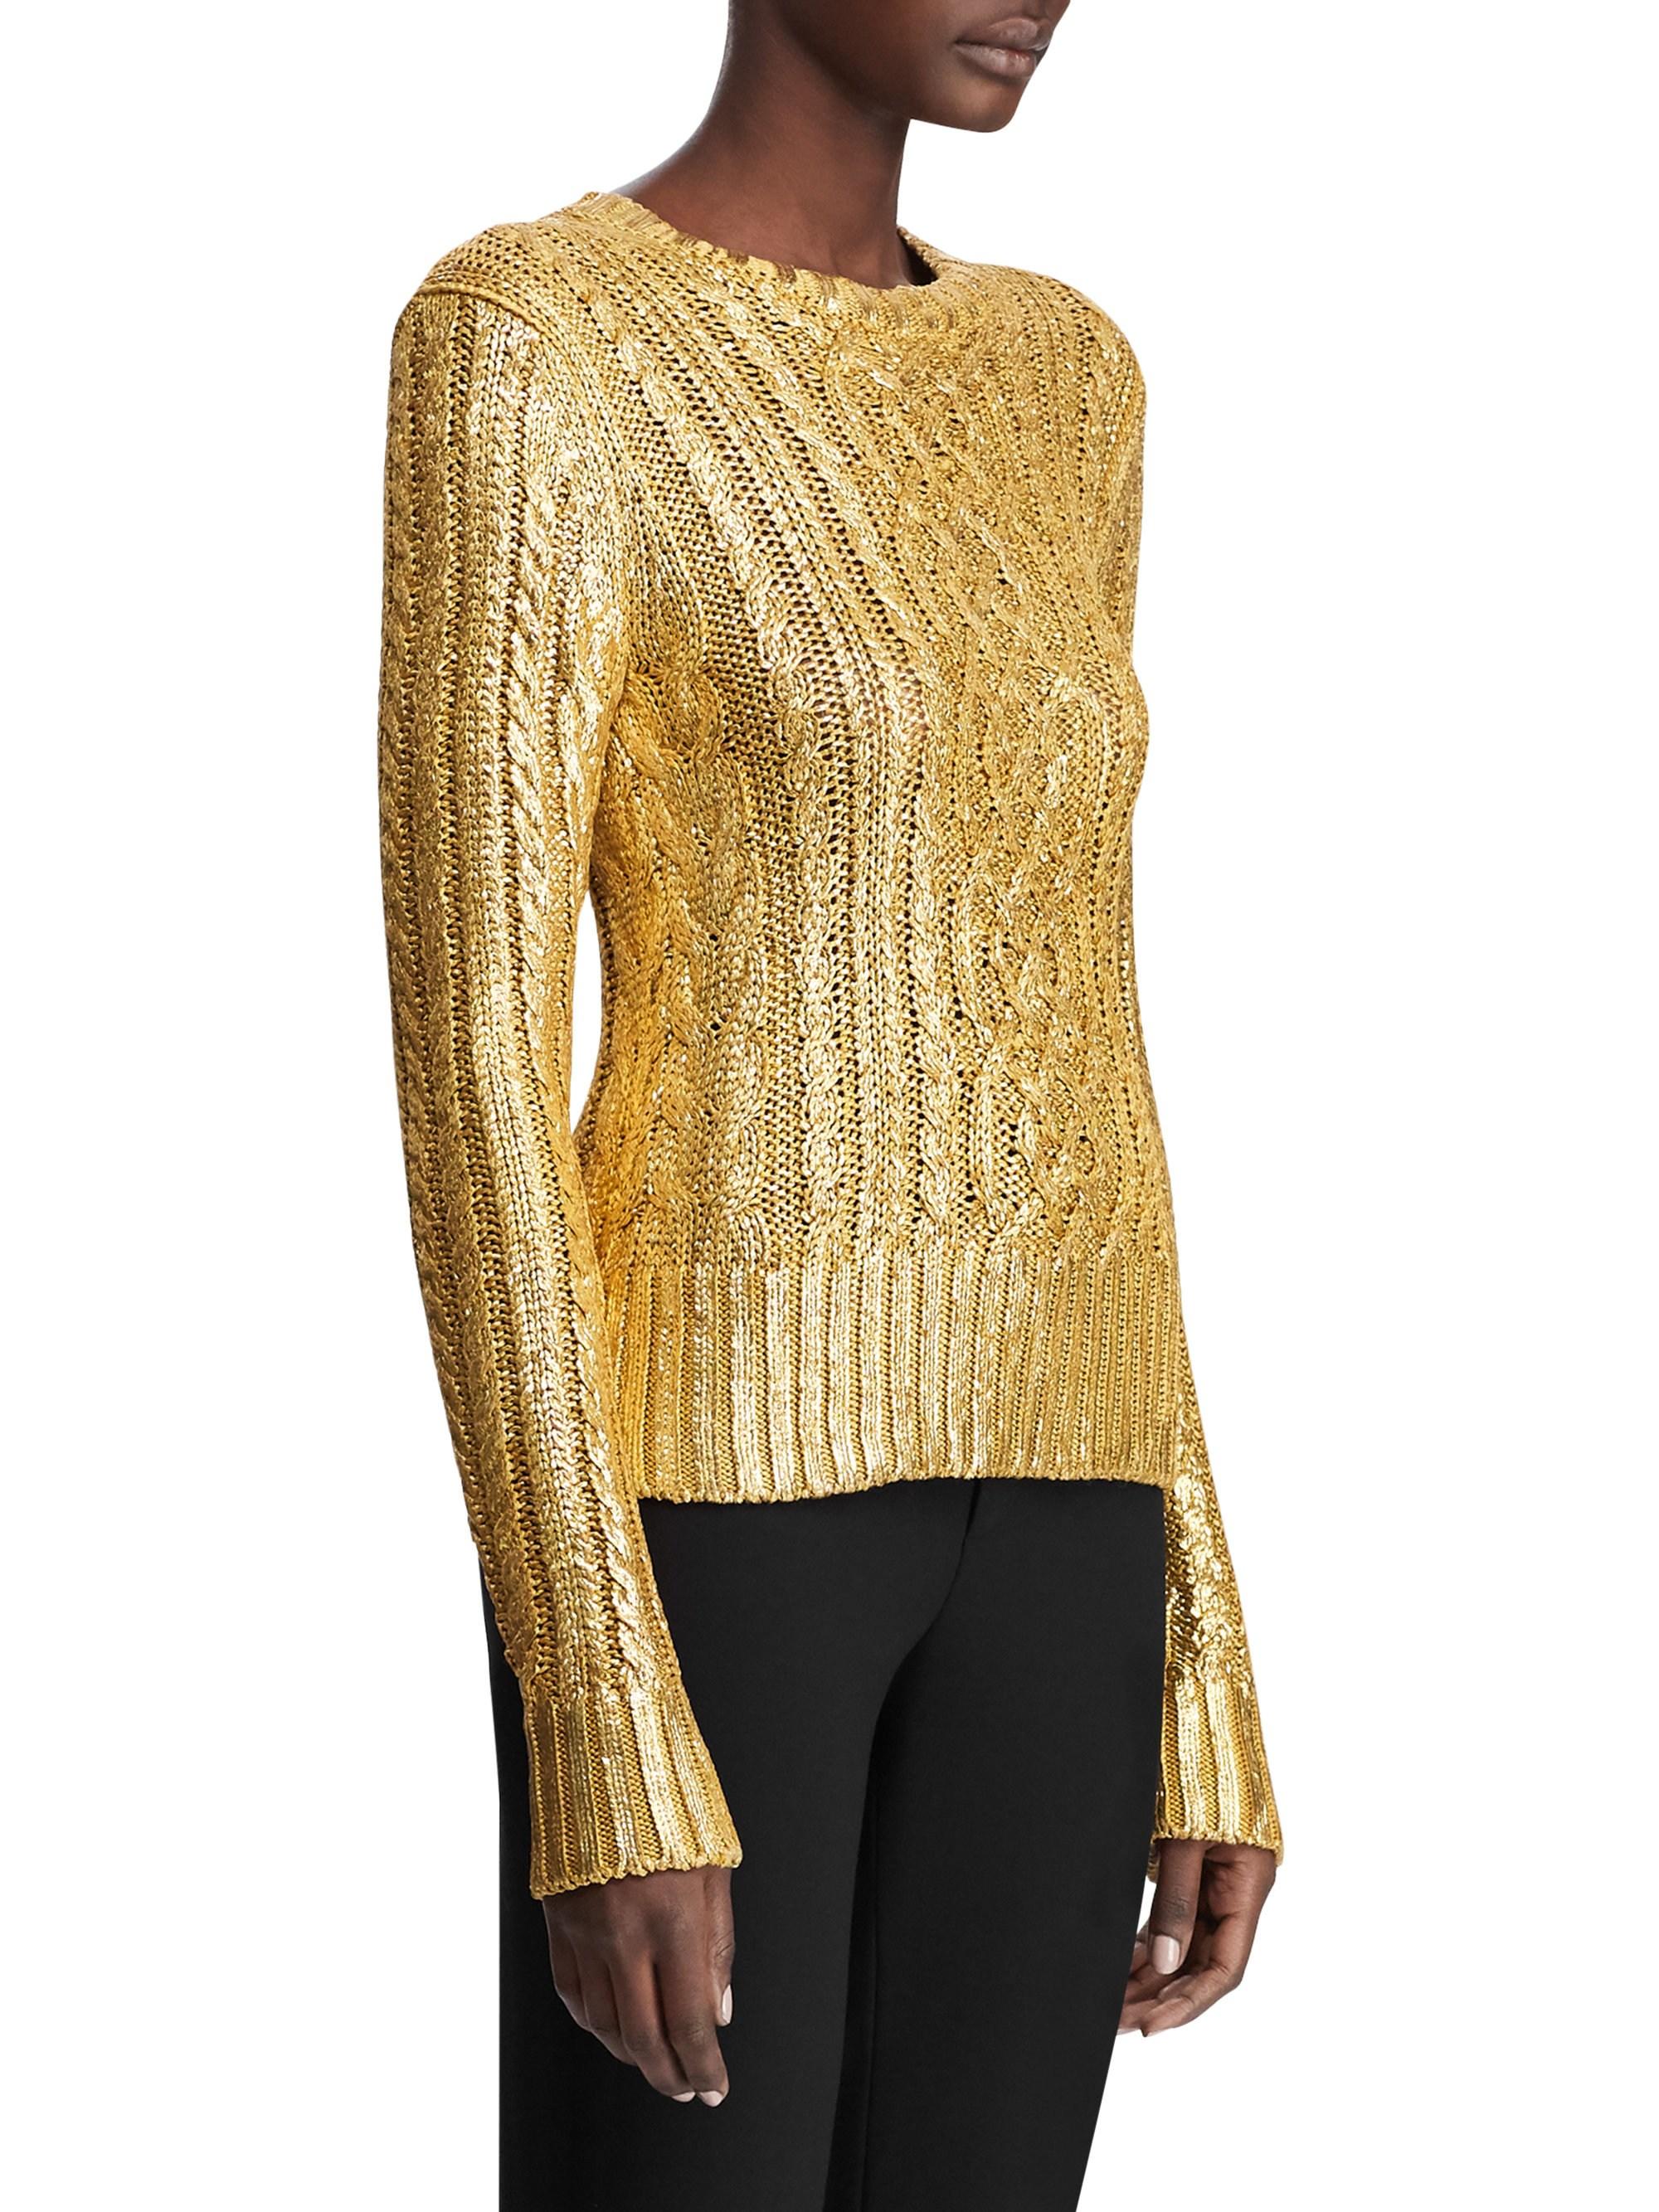 Ralph Lauren Collection Gold Foil Cable Knit Sweater in Metallic - Lyst